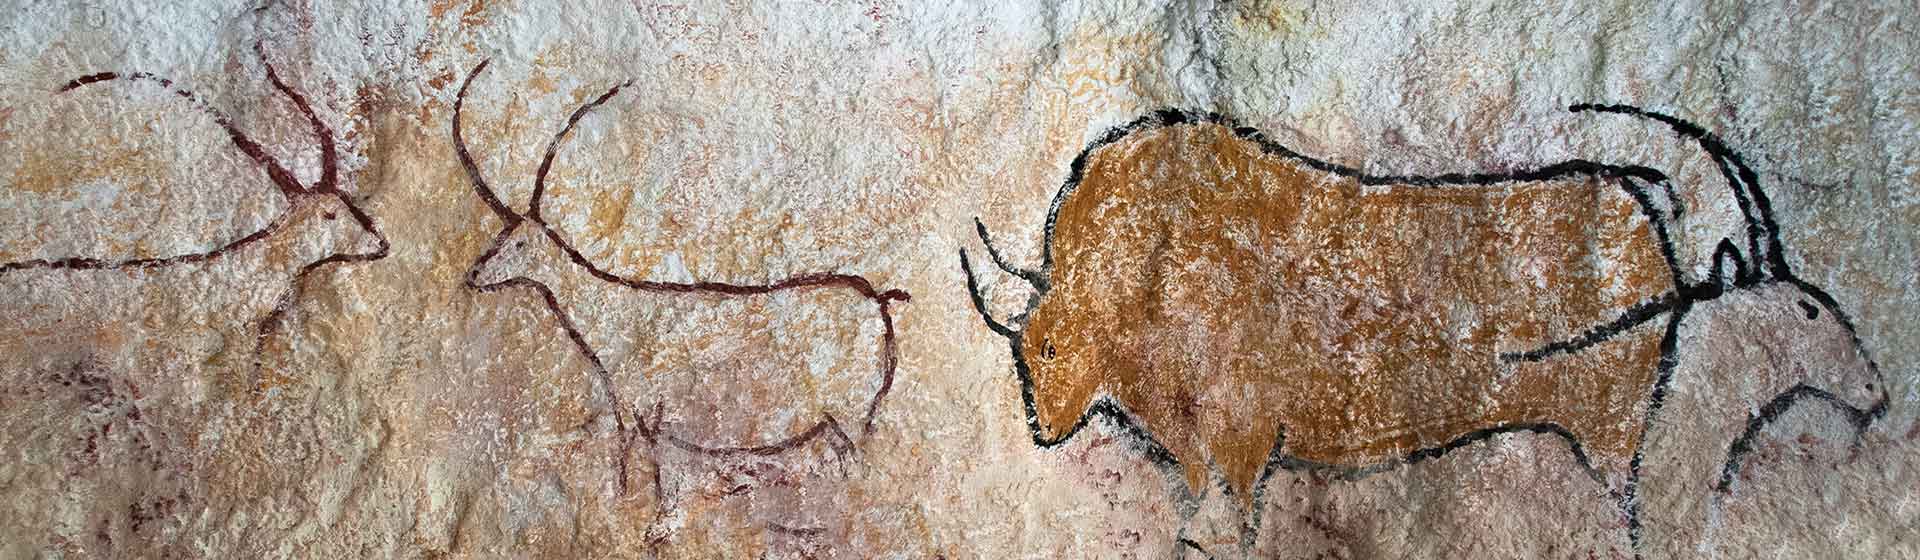 Johnny's on the Rez - A Brief History - Native Cave Paintings